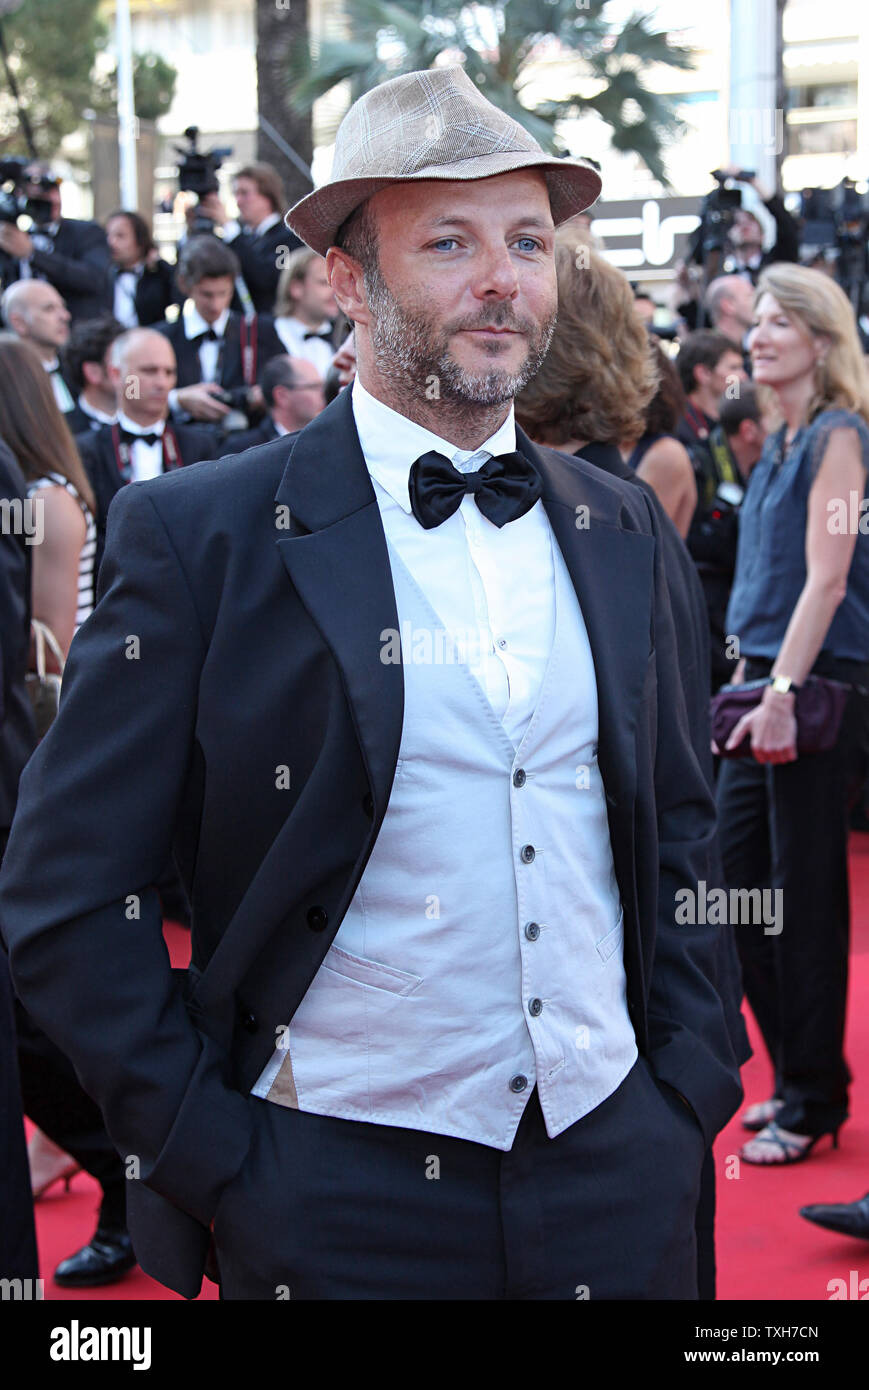 Pierre-Francois Martin-Laval arrives on the red carpet before the screening of the film 'La Source des Femmes (The Source)' during the 64th annual Cannes International Film Festival in Cannes, France on May 21, 2011.  UPI/David Silpa Stock Photo